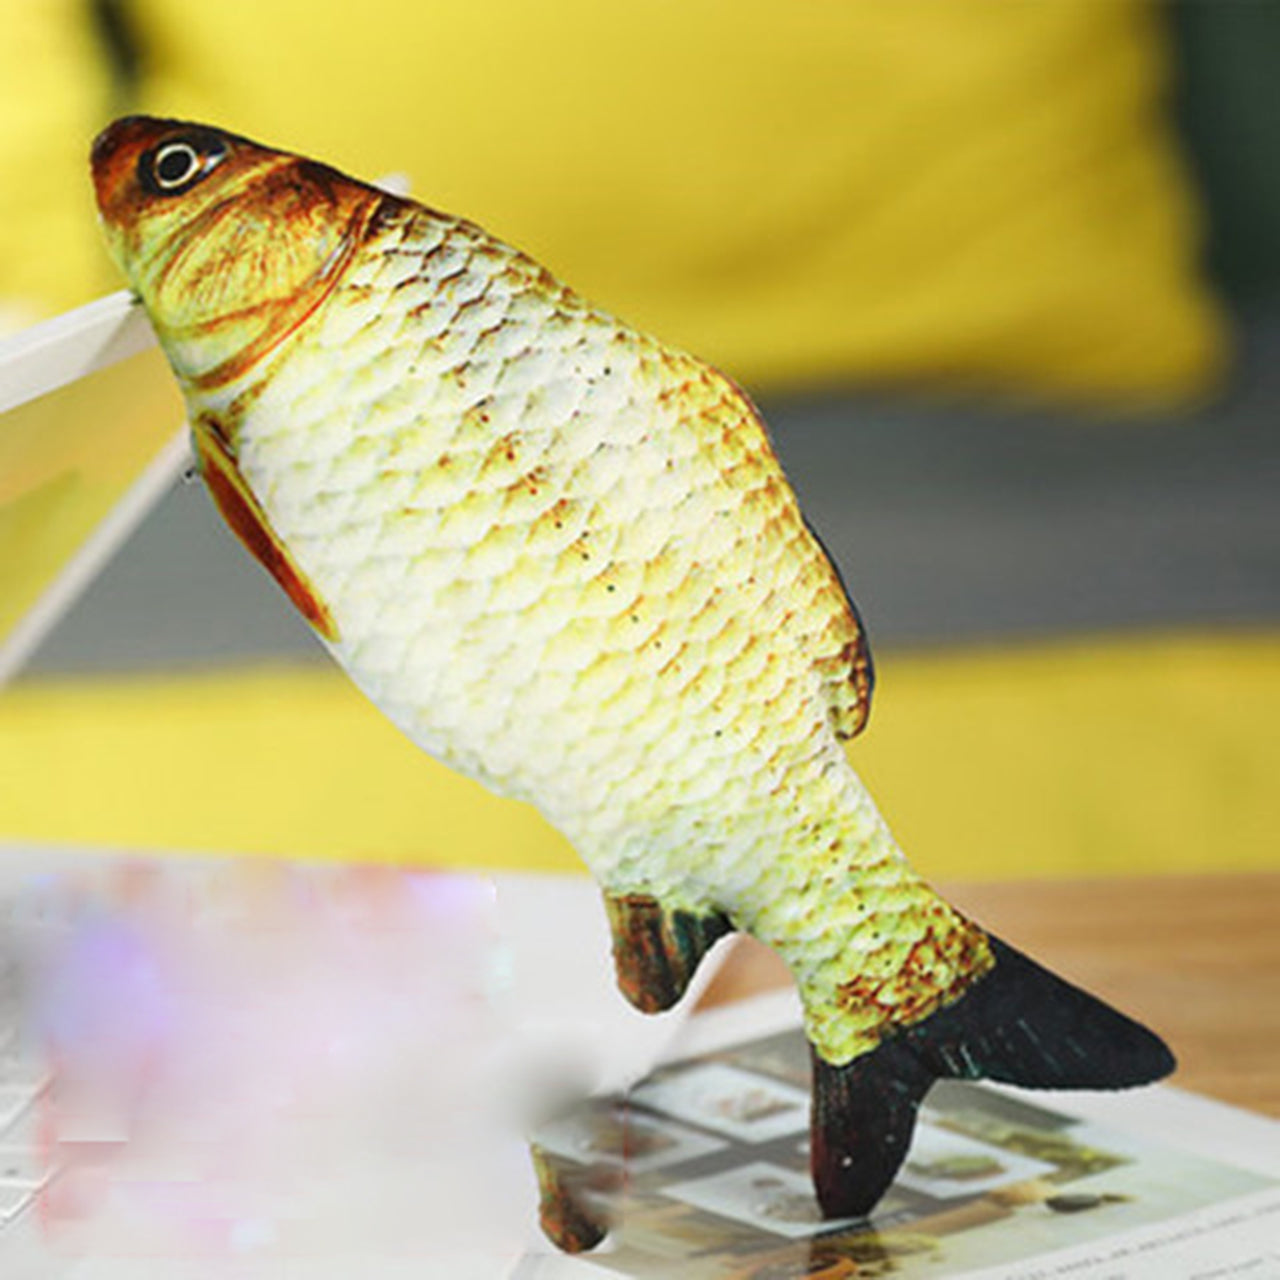 Electric Moving Fish Toy With LIght Sound And Voice Recorder